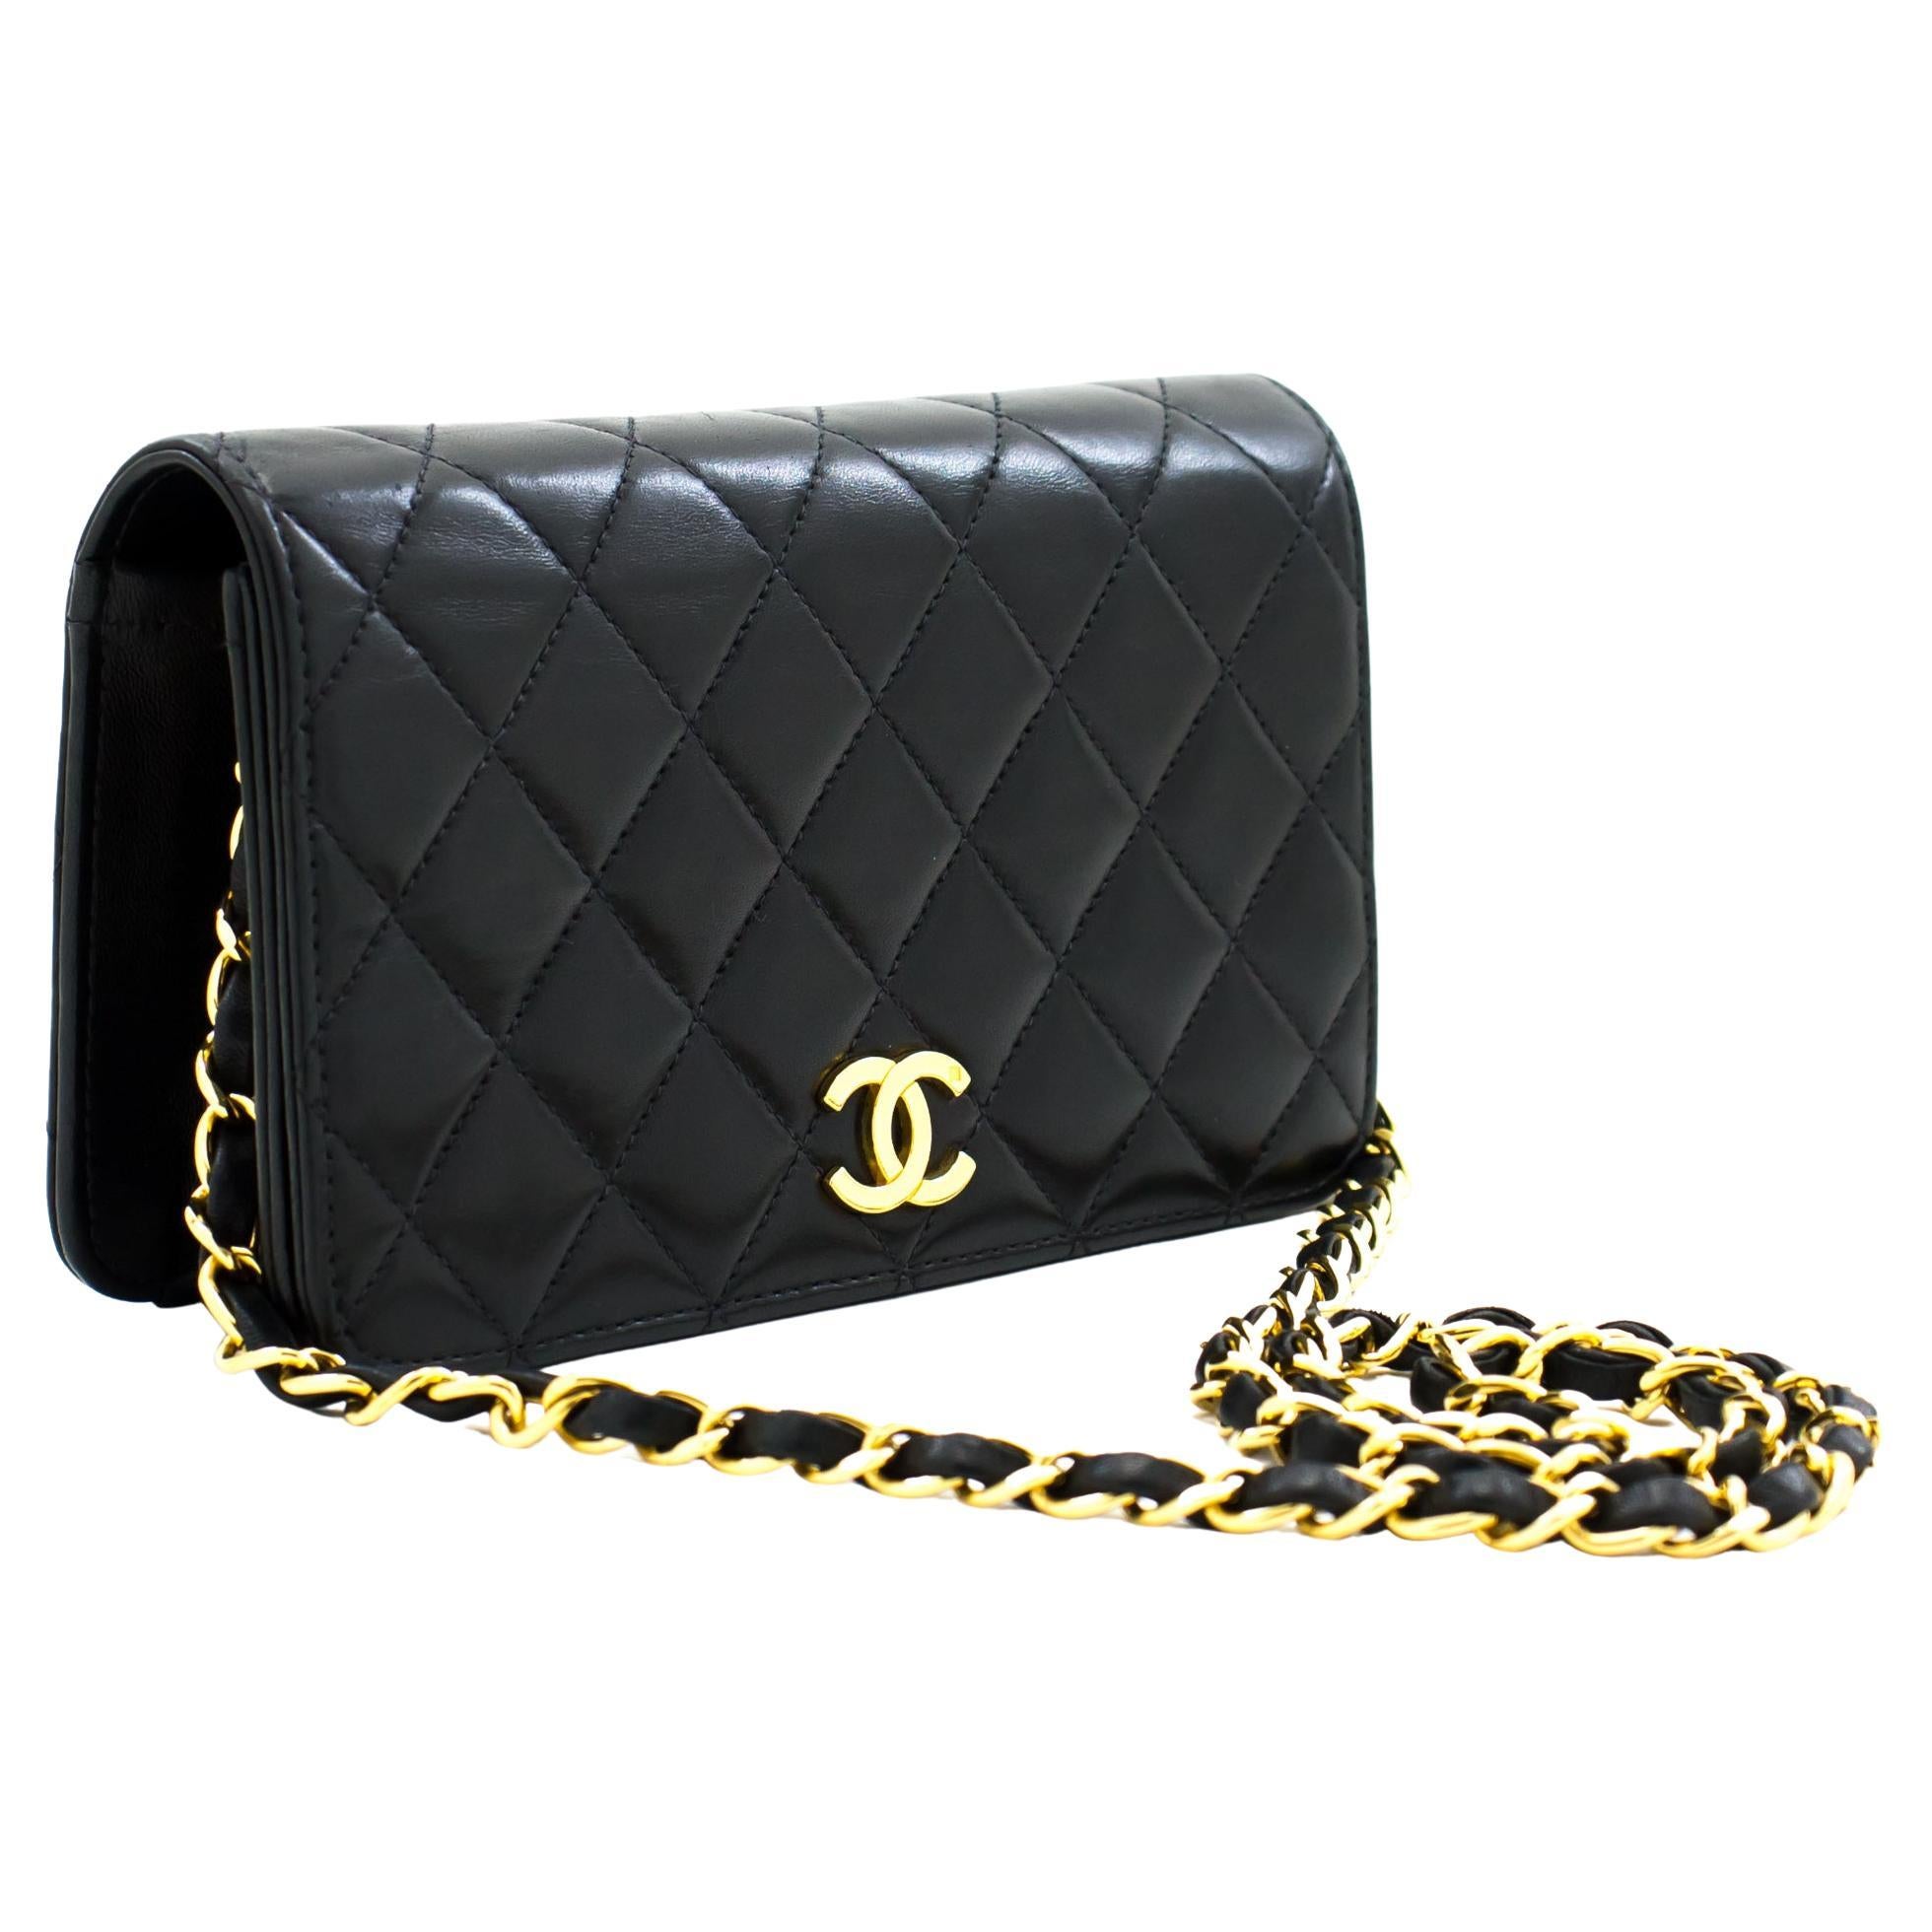 CHANEL Full Flap Small Chain Shoulder Bag Black Clutch Quilted